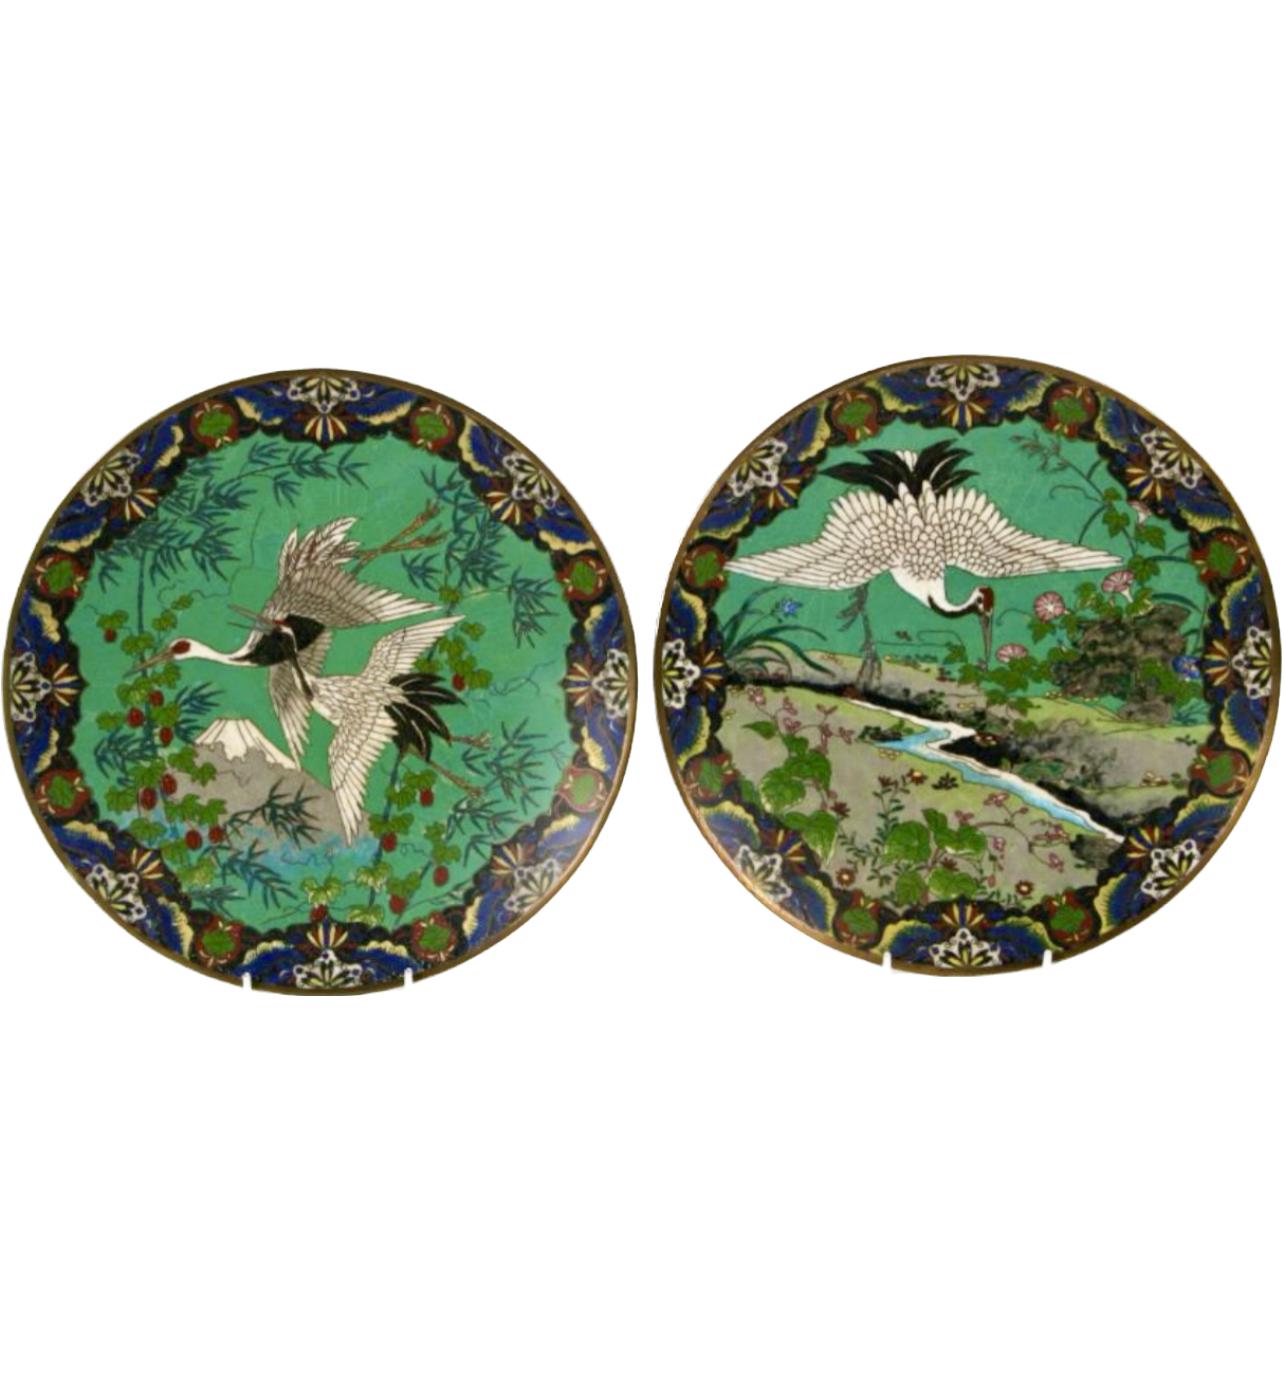 Exquisite Pair of Japanese Cloisonne on Bronze Chargers, Meiji Period, 19th C 1